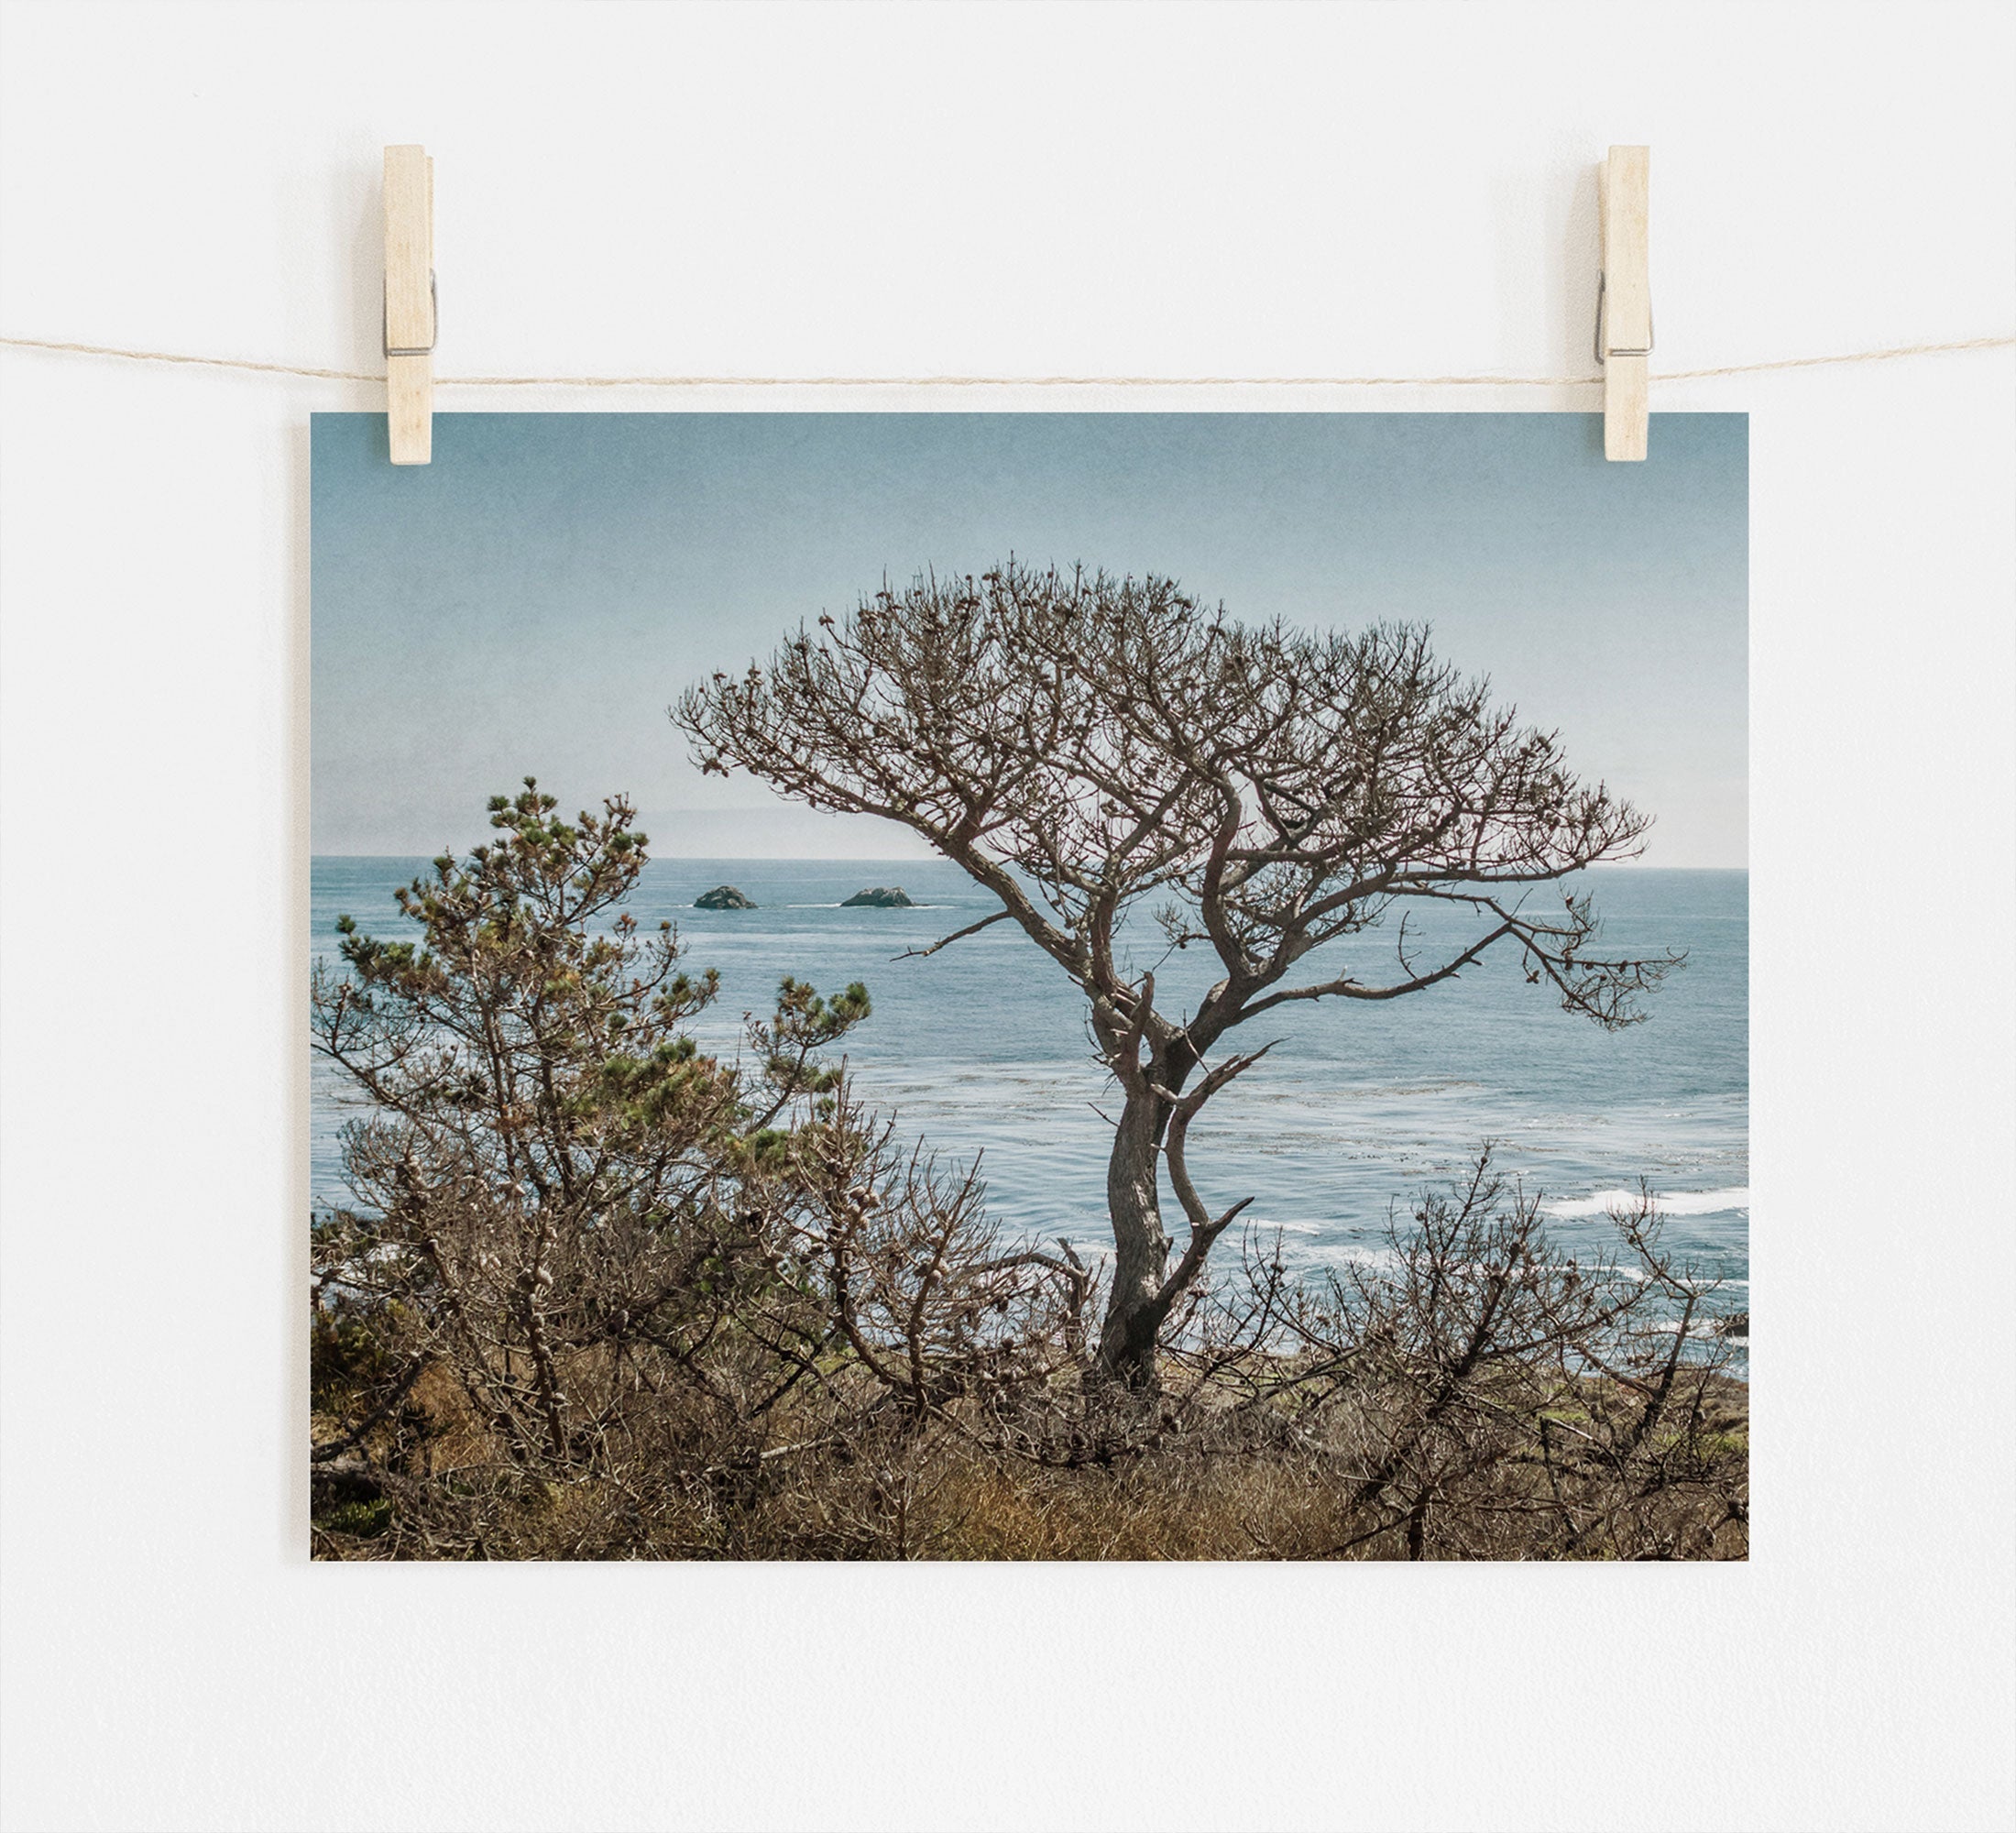 Photo print of a California Landscape Art in Big Sur, &#39;Wind Blown Tree&#39; by Offley Green, pinned on a wall with wooden clothespins.